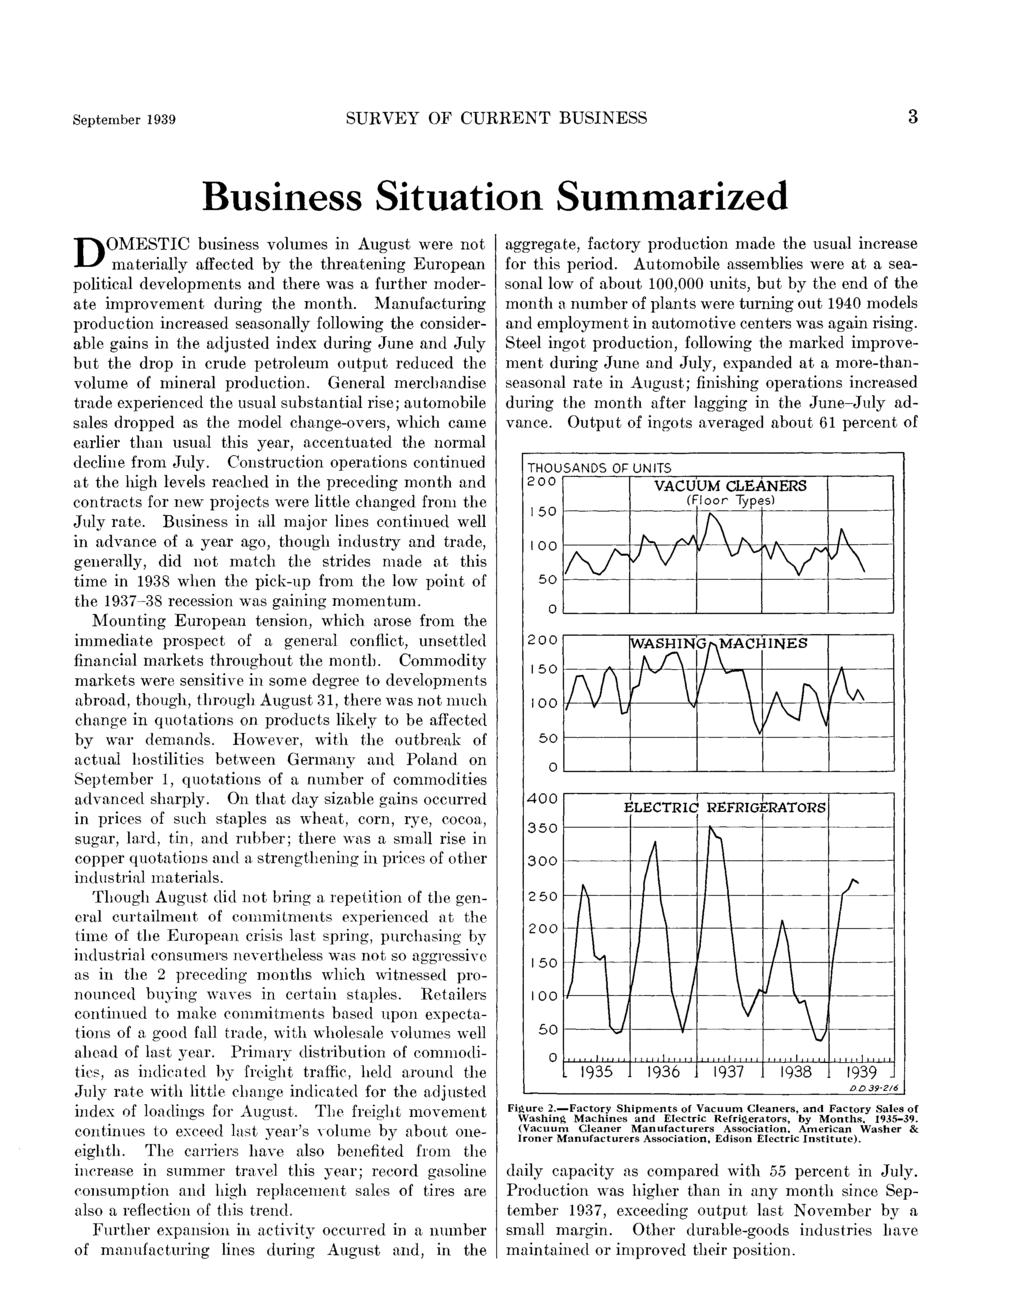 SURVEY OF CURRENT BUSINESS Business Situation Summarized DOMESTIC business volumes in were not materially affected by the threatening European political developments and there was a further moderate